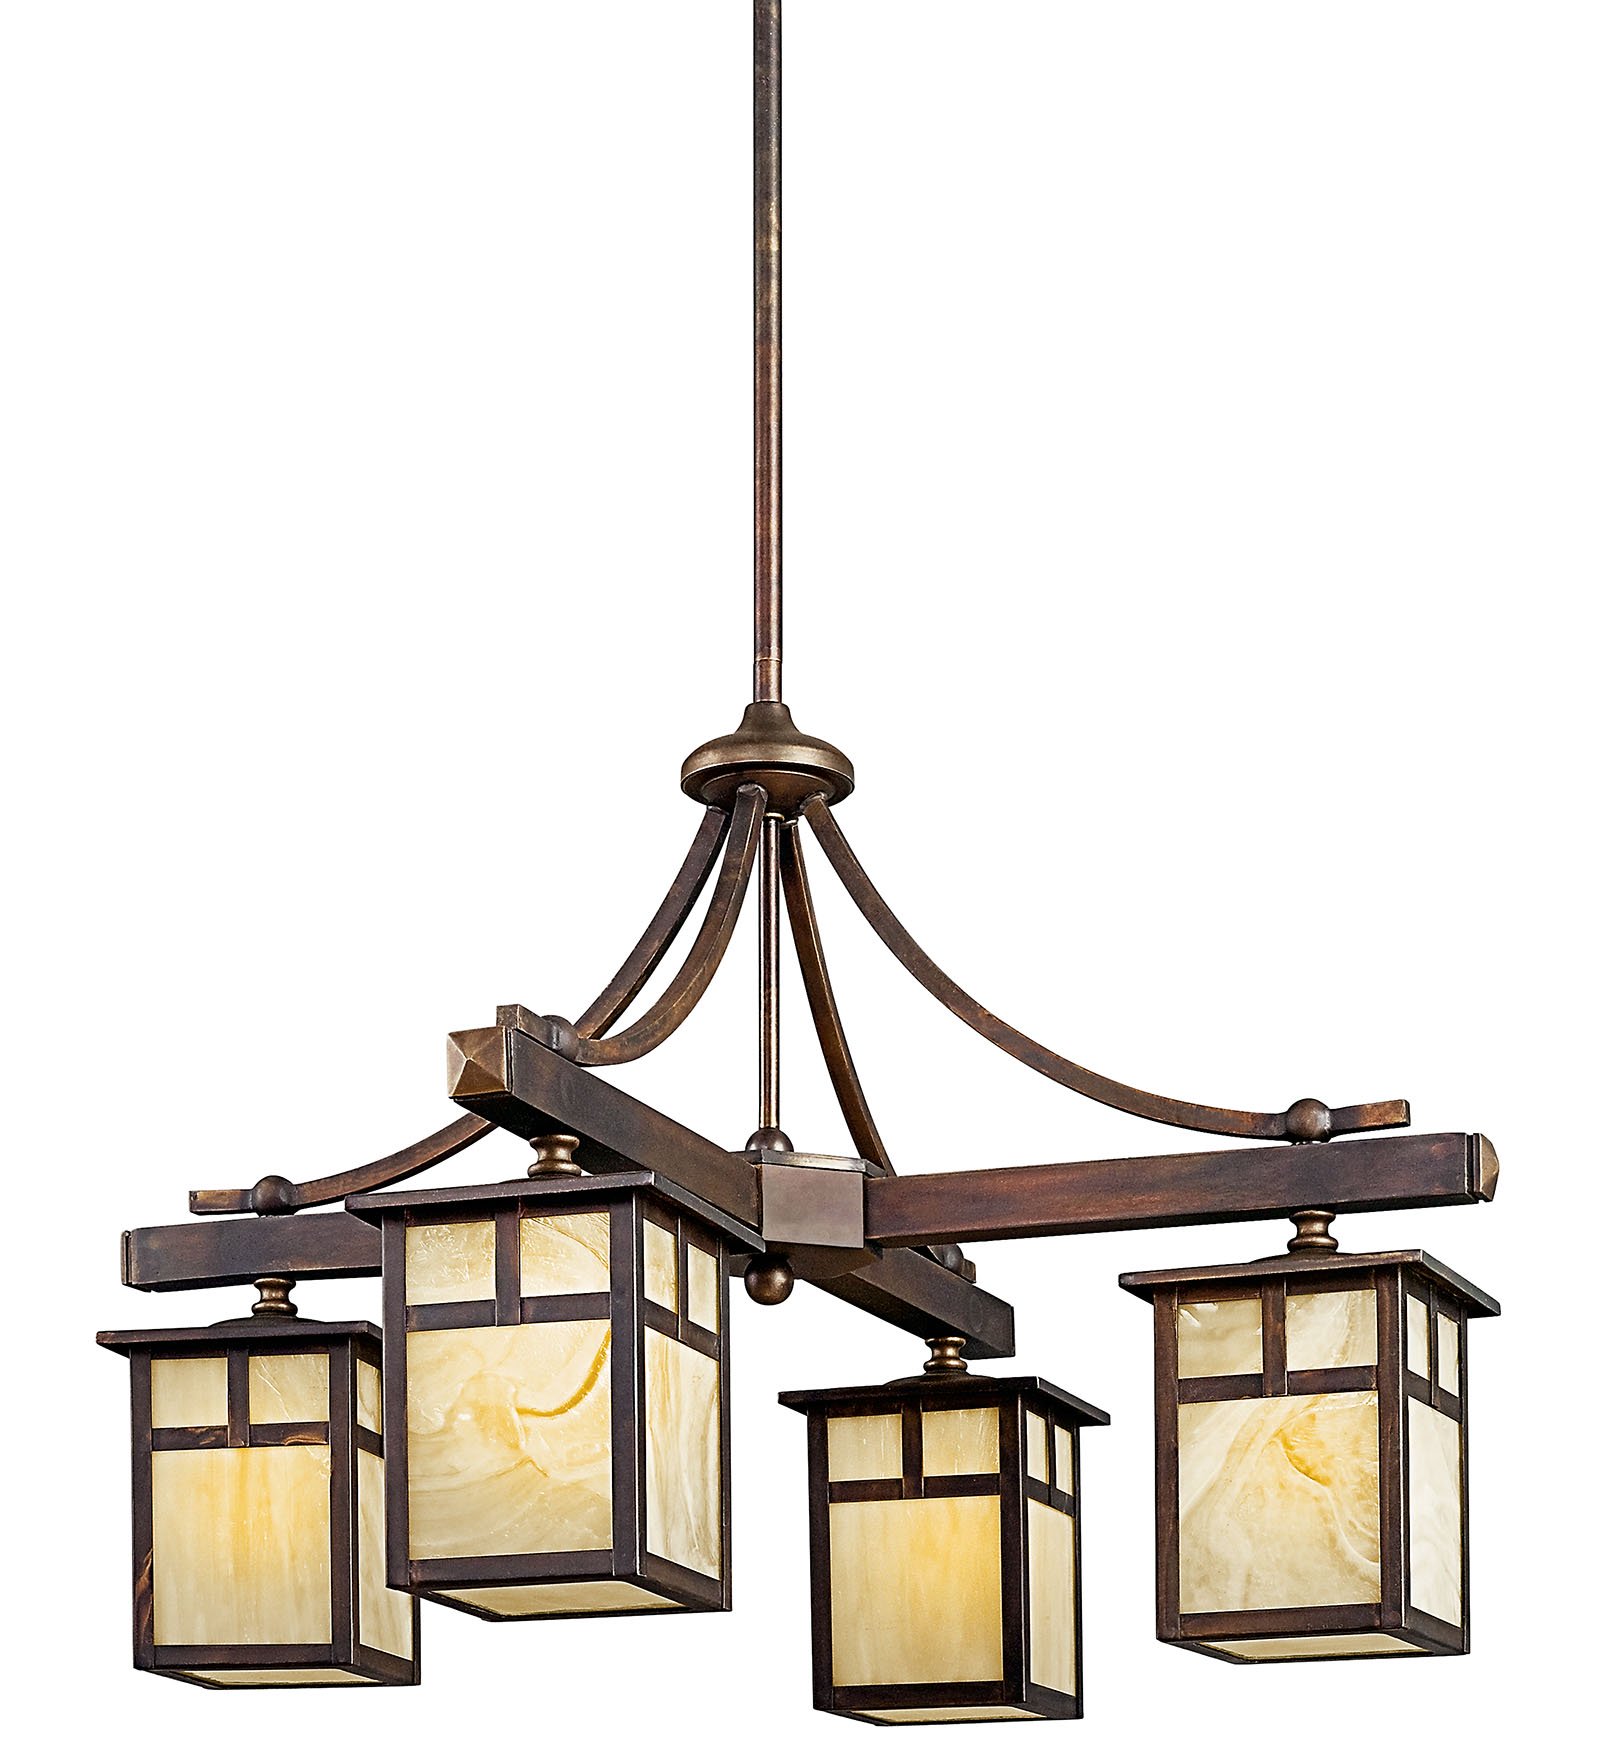 This 4 light outdoor chandelier from the Alameda(TM) collection will bring a cozy, down-to-earth design to your outer décor. A classic lantern shape, this fixture features a distinctive Canyon View(TM) finish and luminous Honey Opalescent Glass.